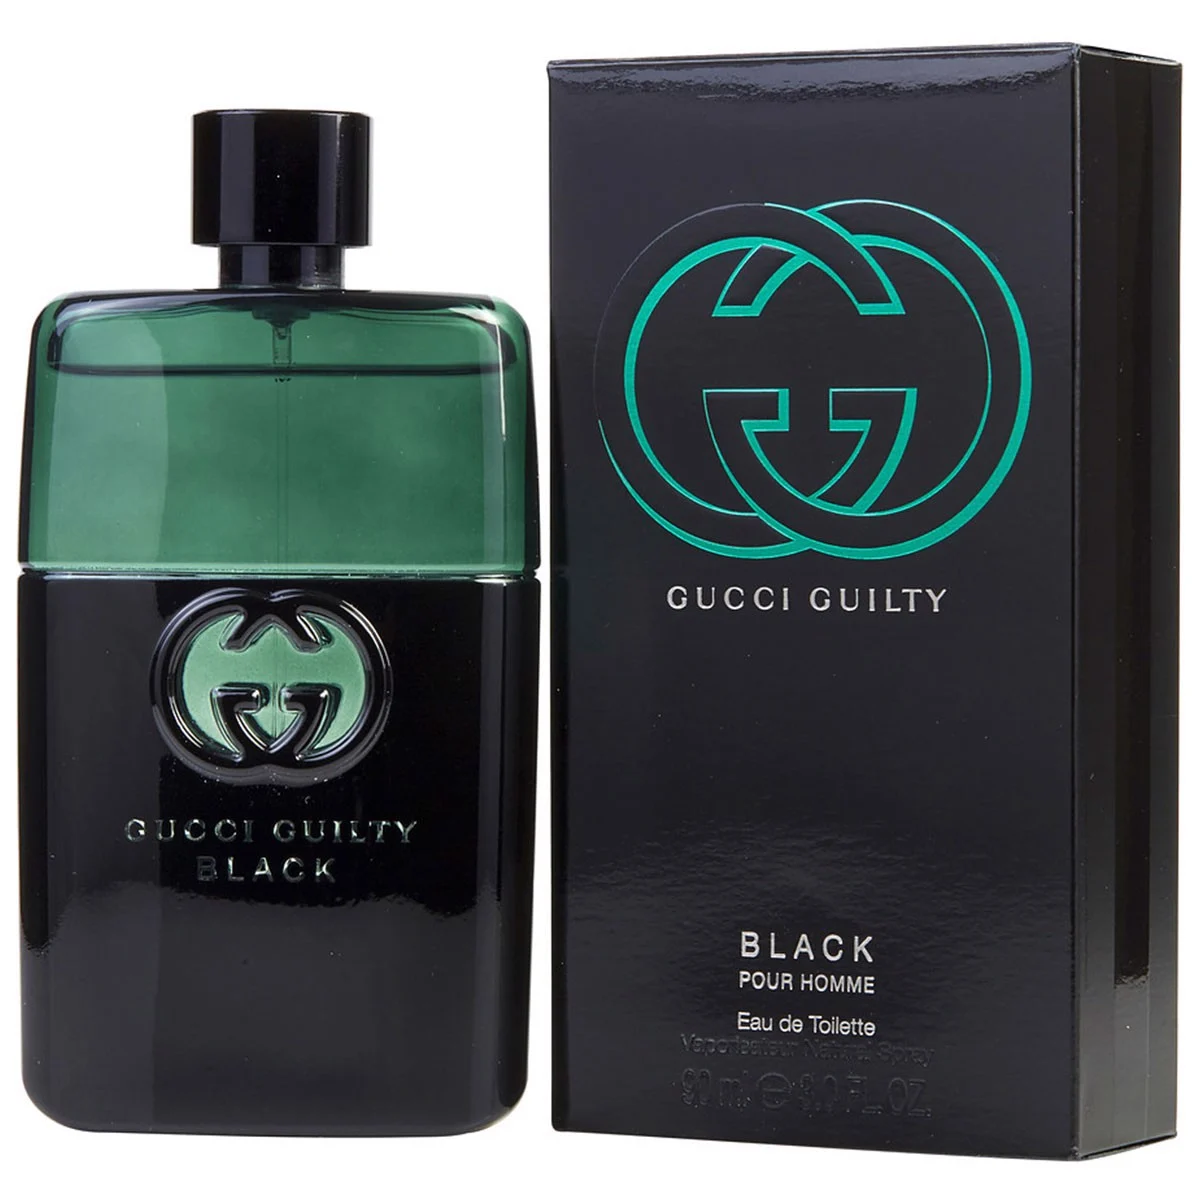 Gucci-Guilty-Black-Pour-Homme-EDT-gia-tot-nhat